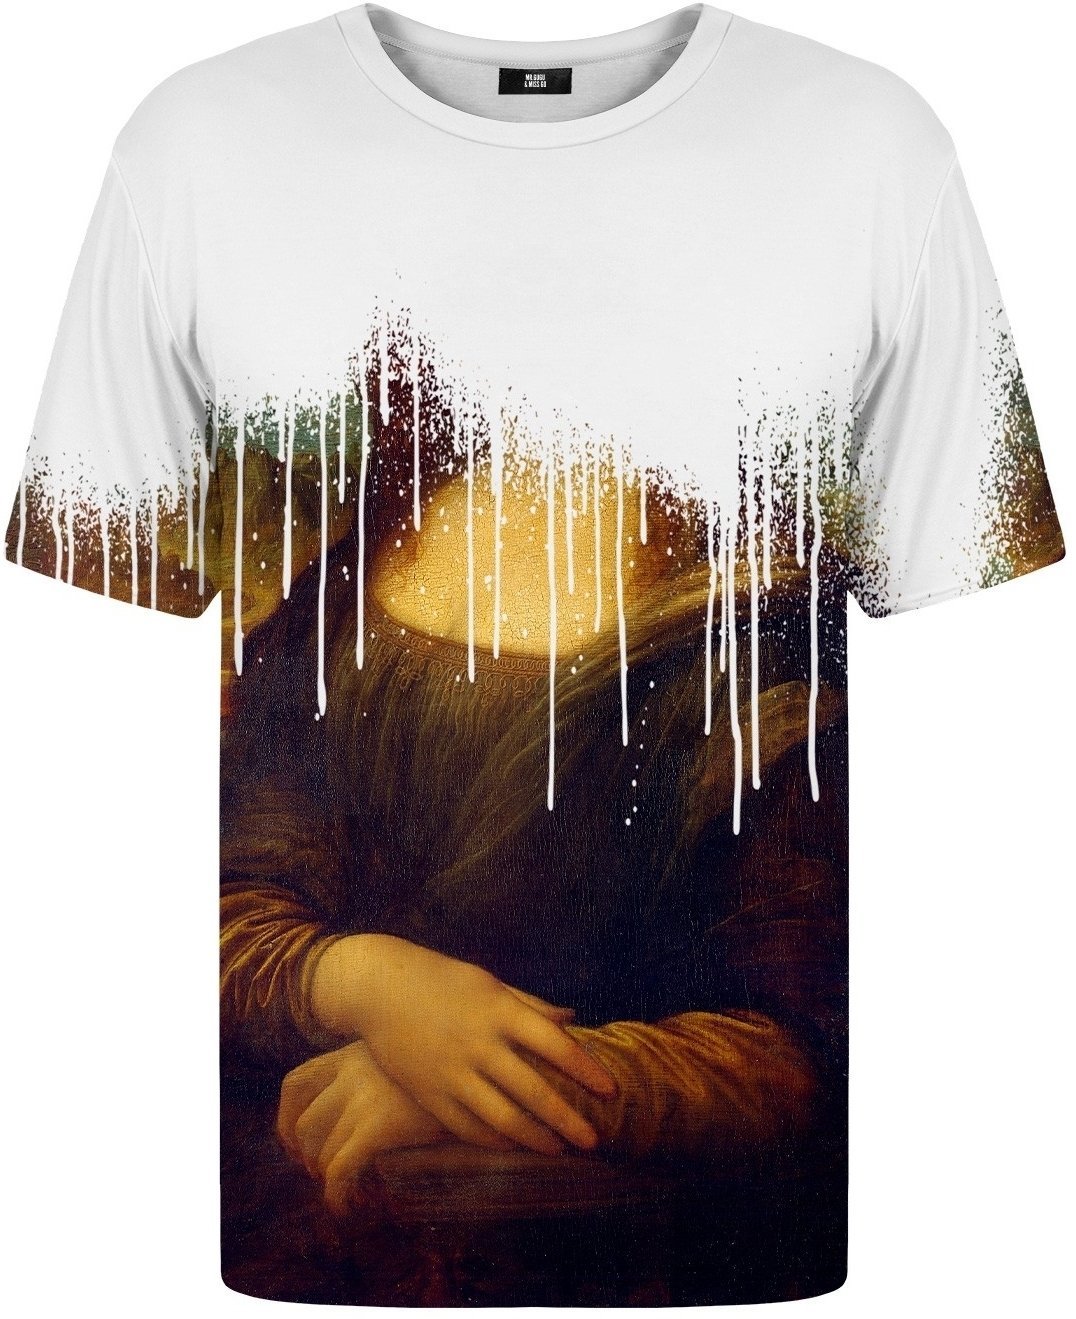 Ing Mr. Gugu and Miss Go Mona Lisa is dead T-Shirt XL